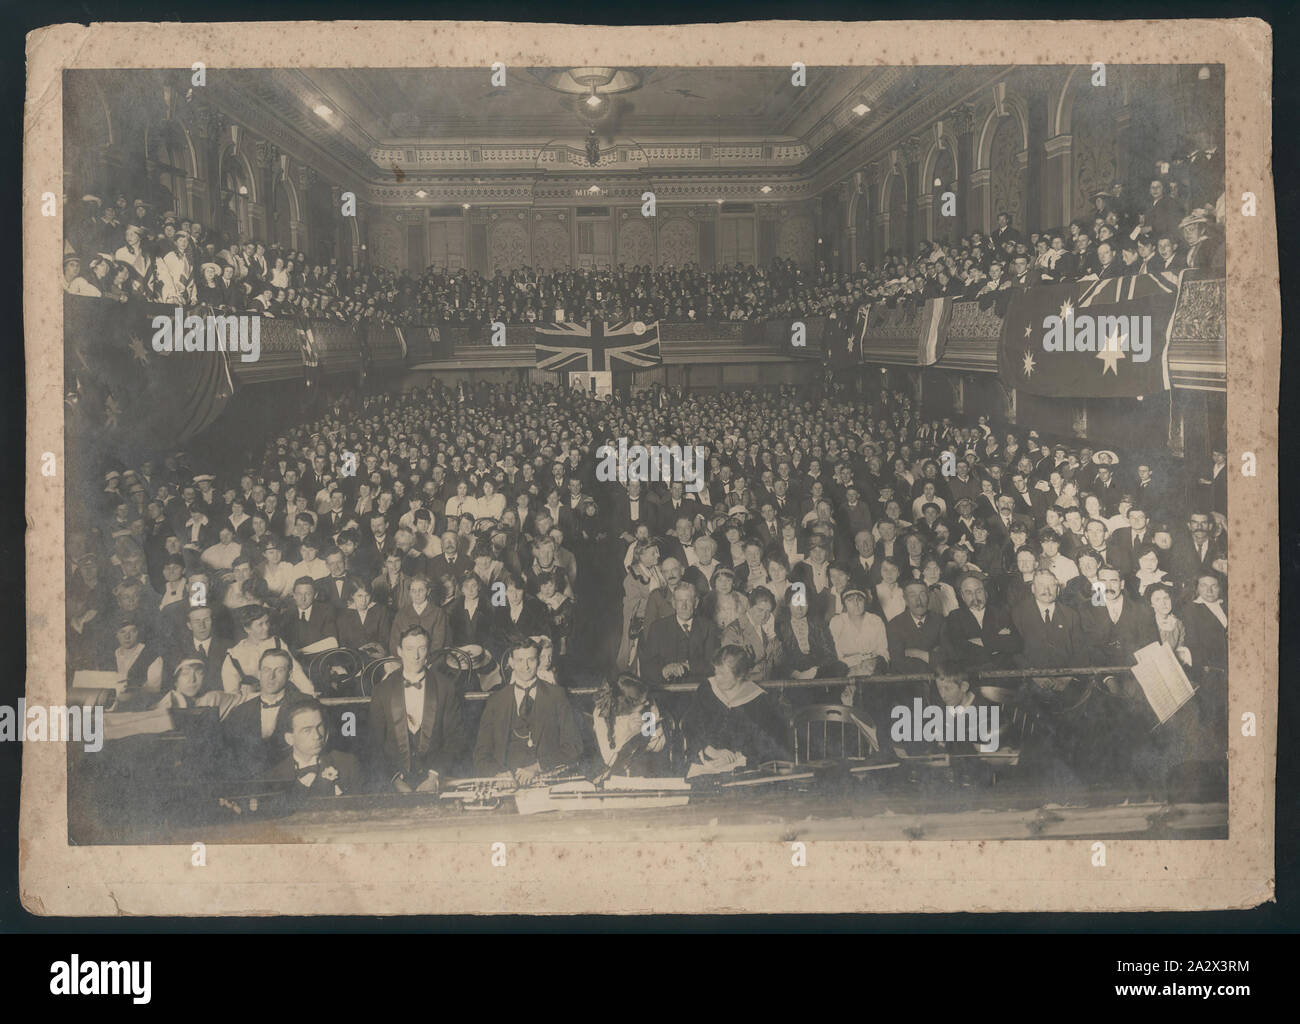 Photograph - Kodak Australasia Limited, Concert Audience, circa 1910s, Black and white photograph of a concert held by Kodak Australasia Limited circa 1910s Stock Photo